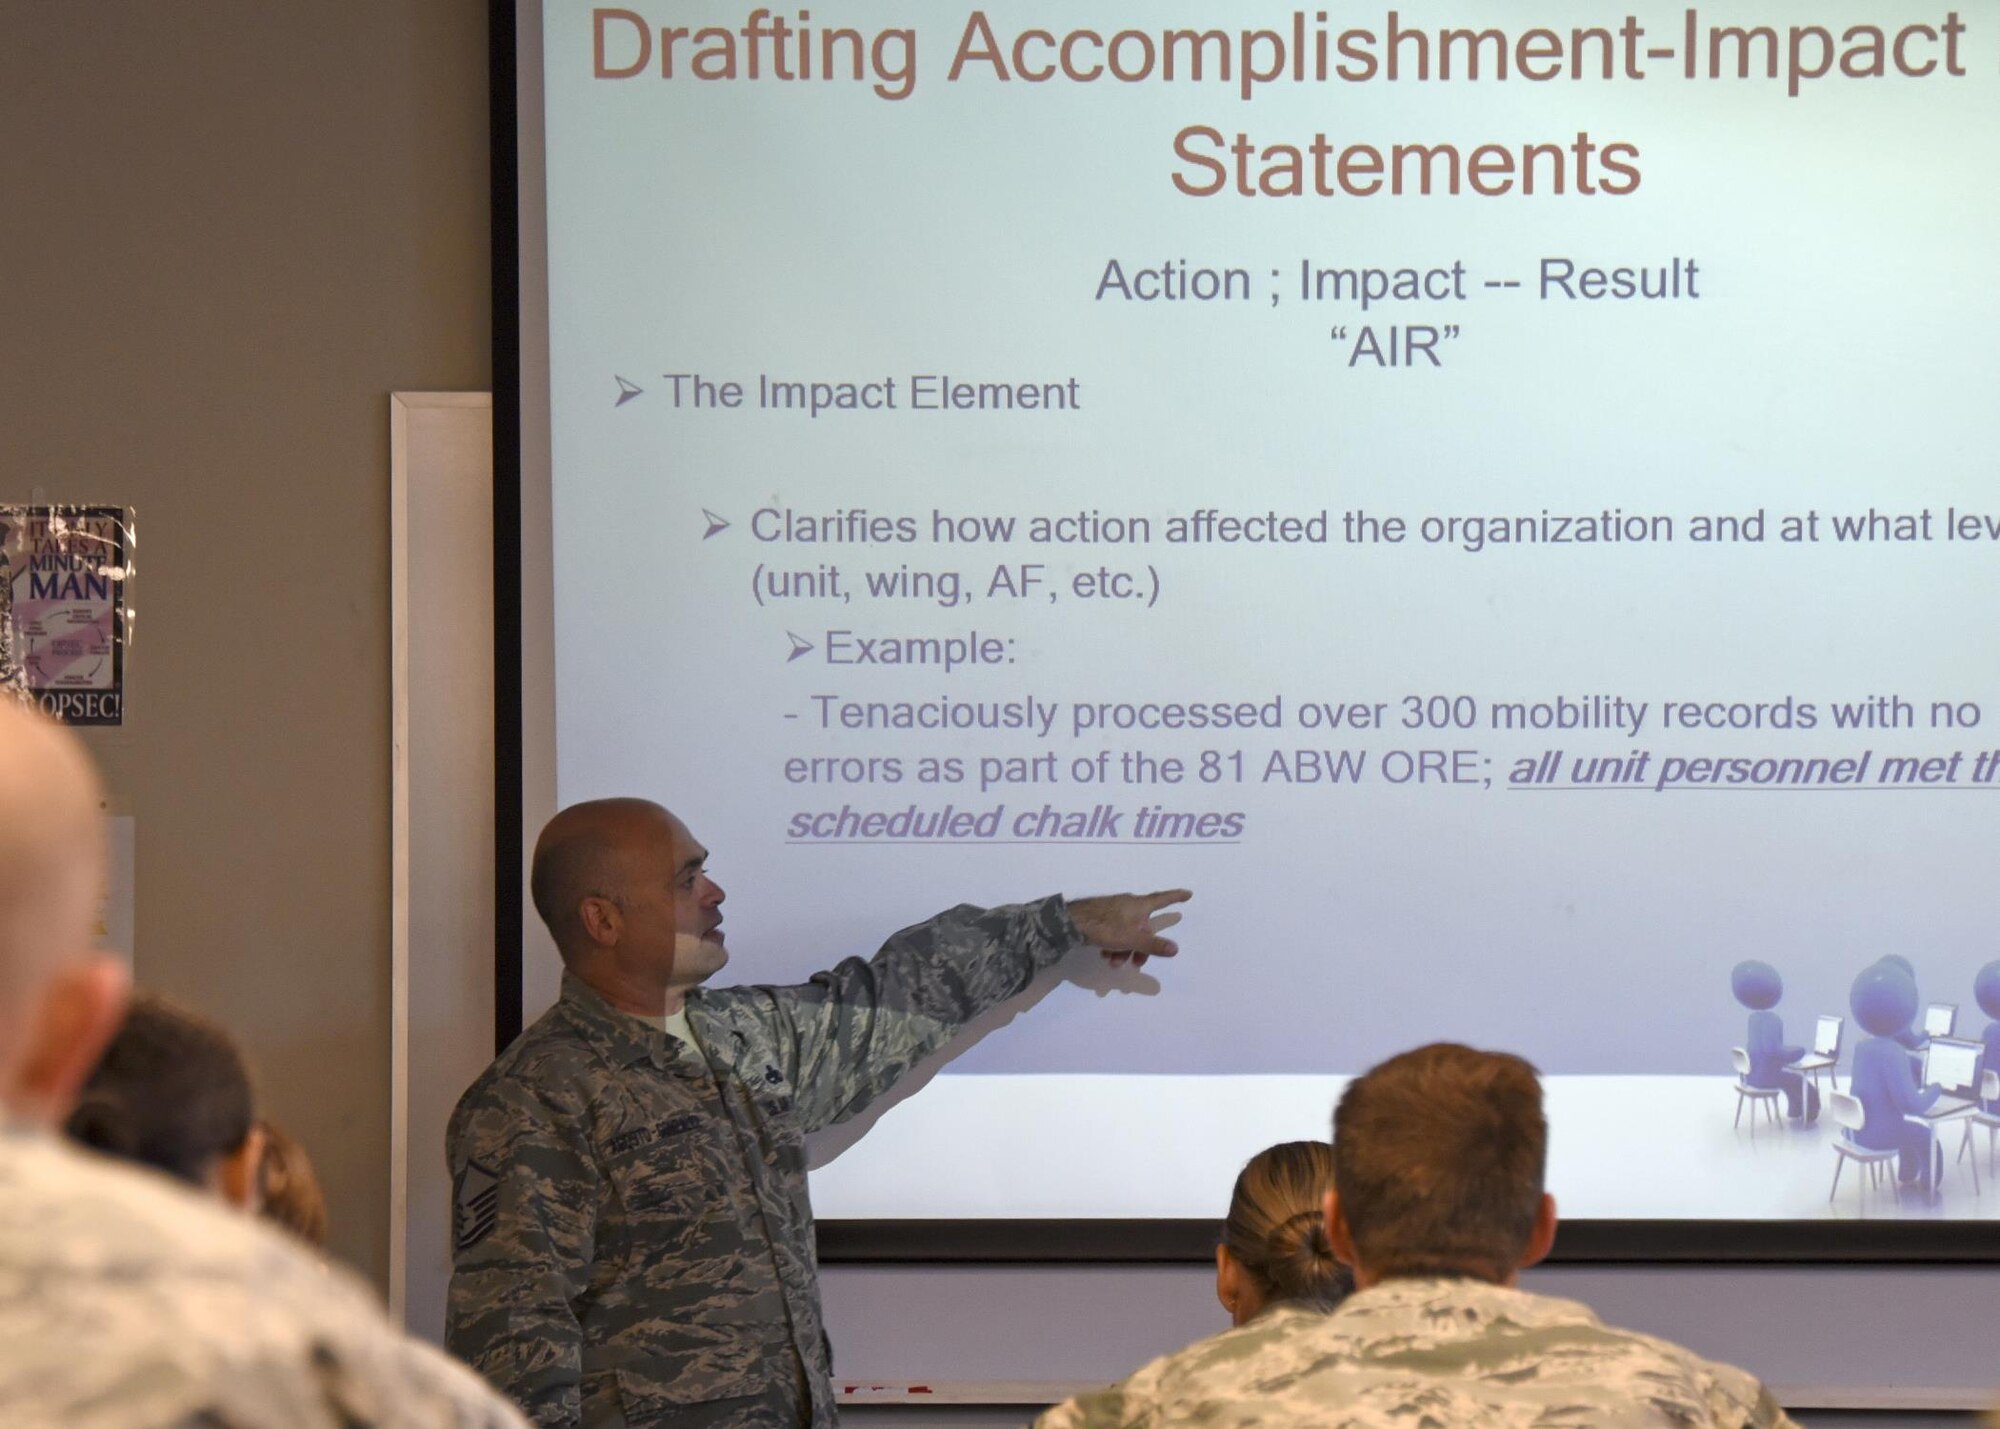 Master Sgt. Jose Agosto-Gonzalez, instructor and curriculum designer, I.G. Brown Training and Education Center, teaches bullet writing to Airmen at the Maryland Air National Guard's 175th Wing, June 20, 2017, in Middle River, Md. The two-hour class teaches the fundamental dynamics on how to write an effective bullet statement for enlisted performance reports and officer performance reports. (U.S. Air National Guard photo by Senior Airman Enjoli Saunders)